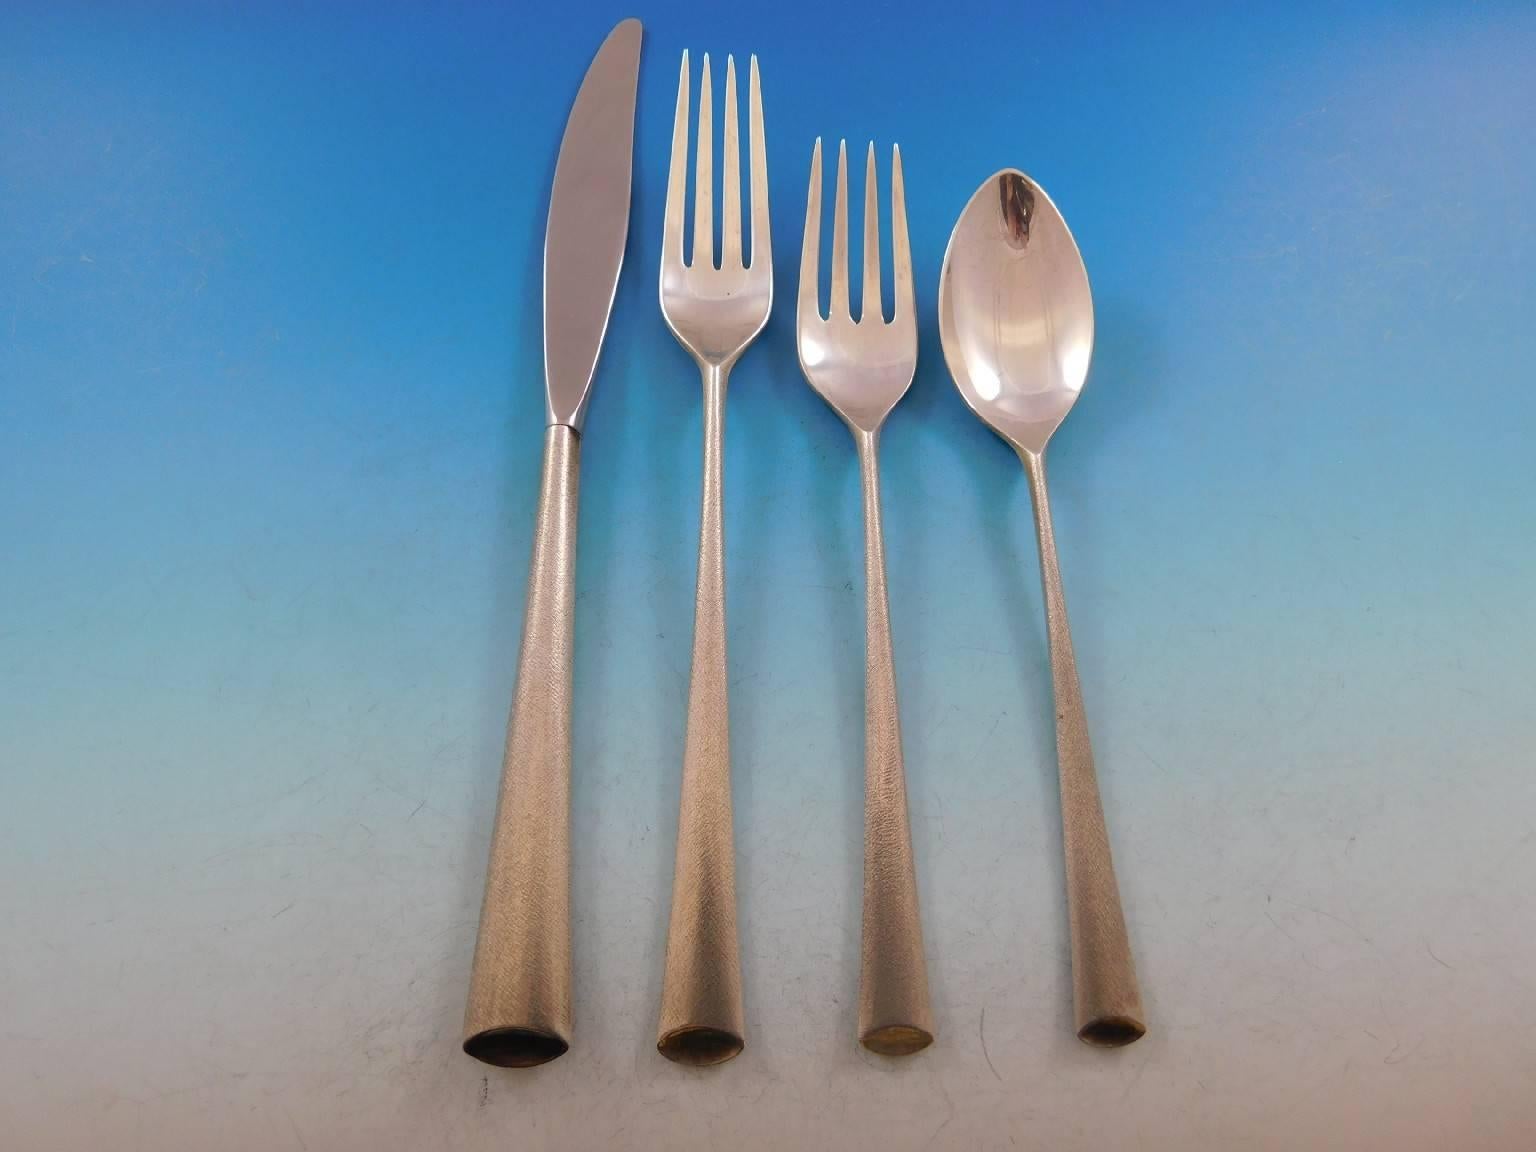 Mid-Century Modern Royal Satin by Wallace, circa 1965 sterling silver flatware set, the handles with satin/matte finish, 55 pieces. This set includes:

 Measure: 12 knives, 9